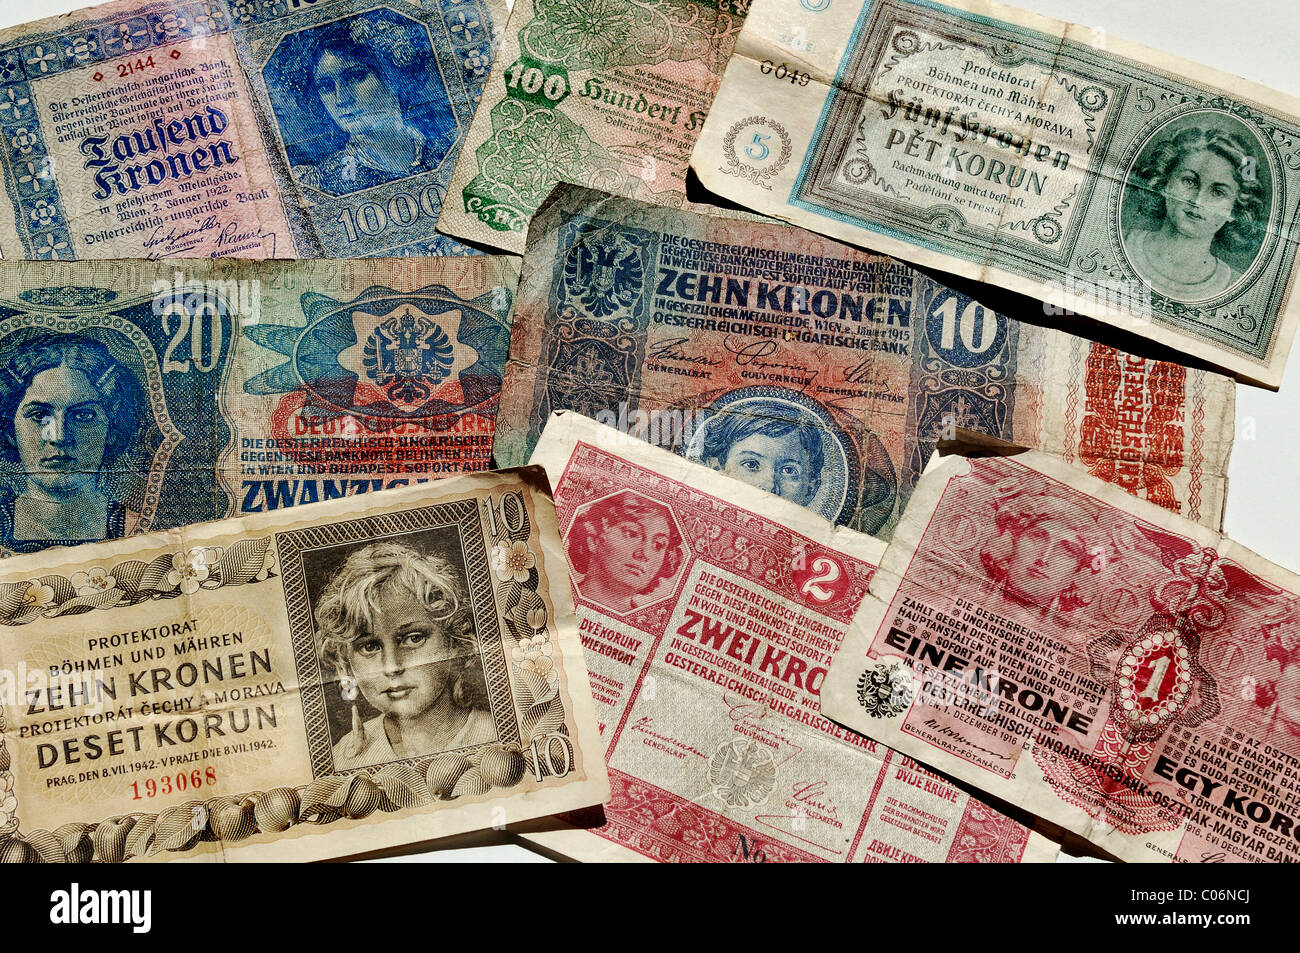 Kronen banknotes, Austro-Hungarian Bank and the Protectorate of Bohemia and Moravia, 1915-1942, Europe Stock Photo